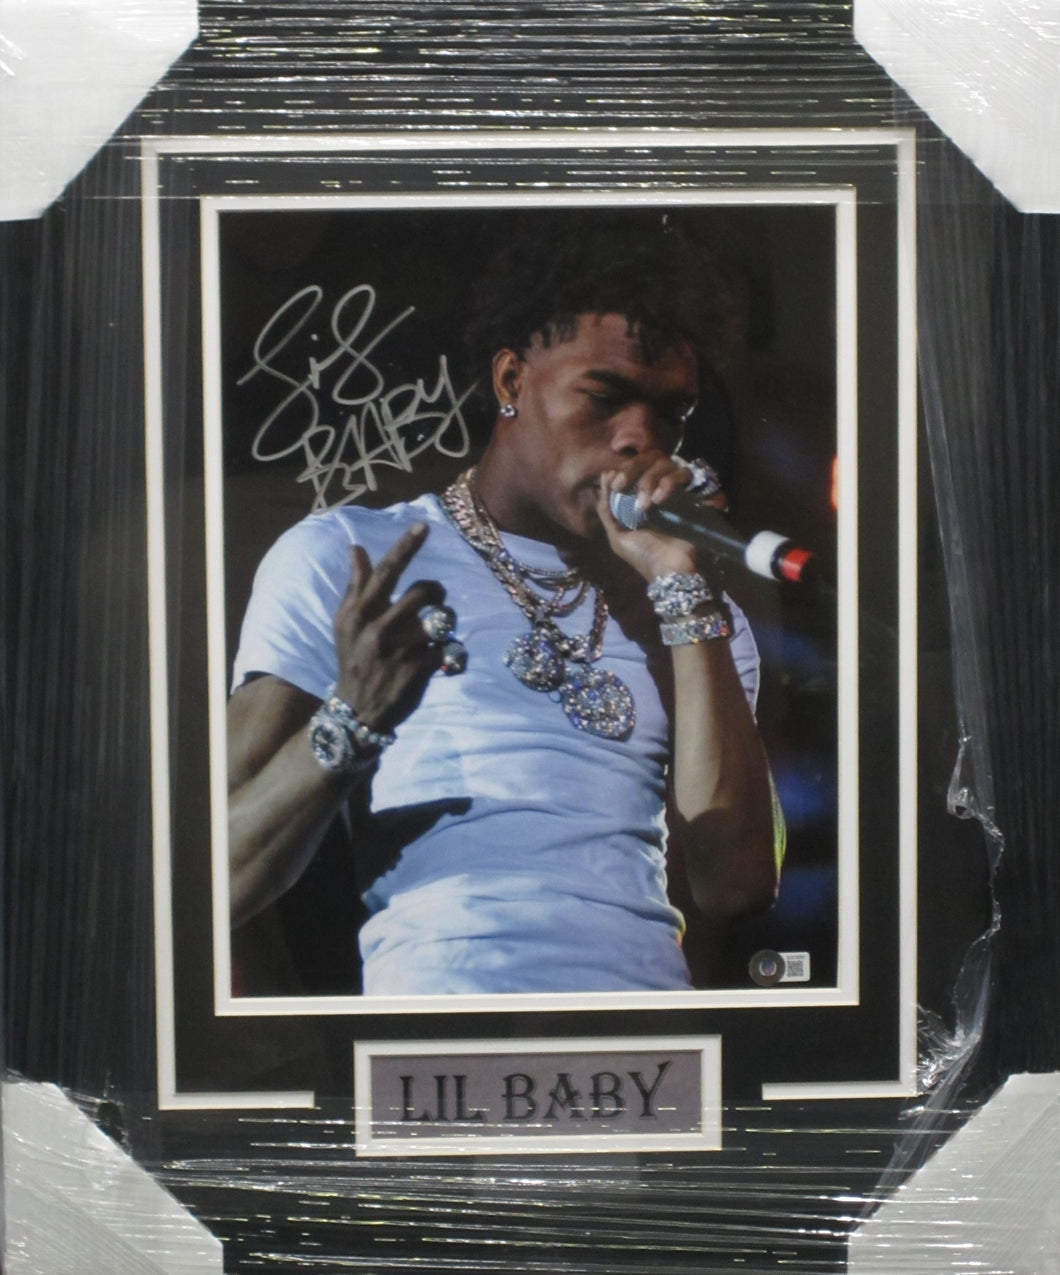 American Rapper Lil Baby Signed 11x14 Photo Framed & Matted with BECKETT COA